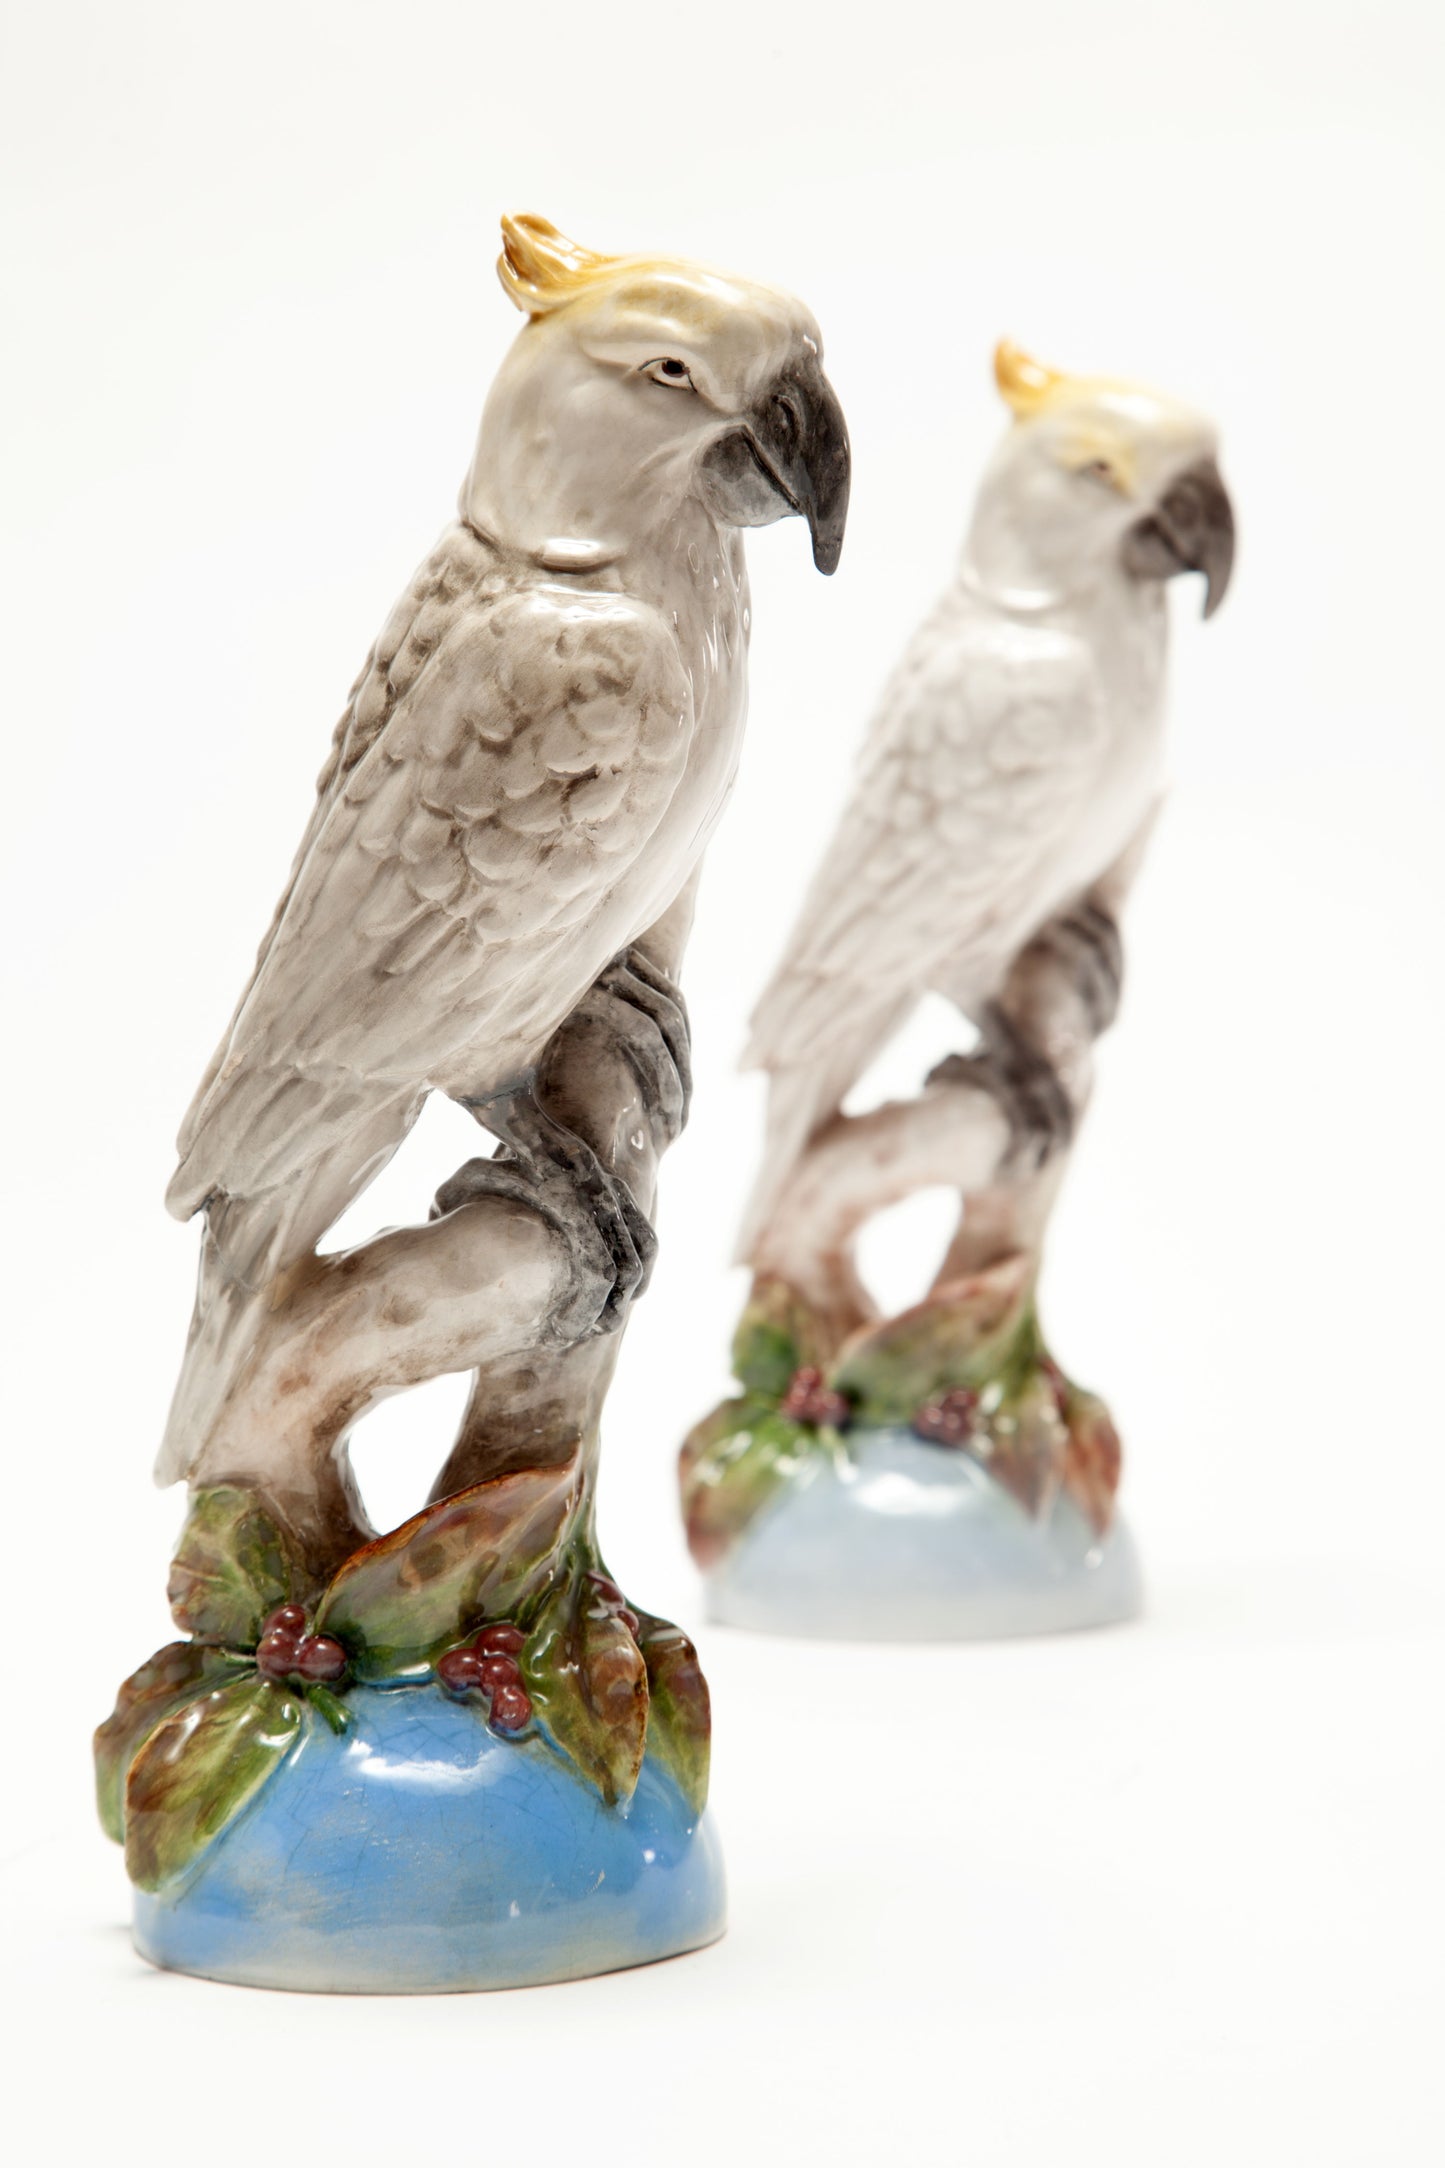 Pair of painted French ceramic parrots